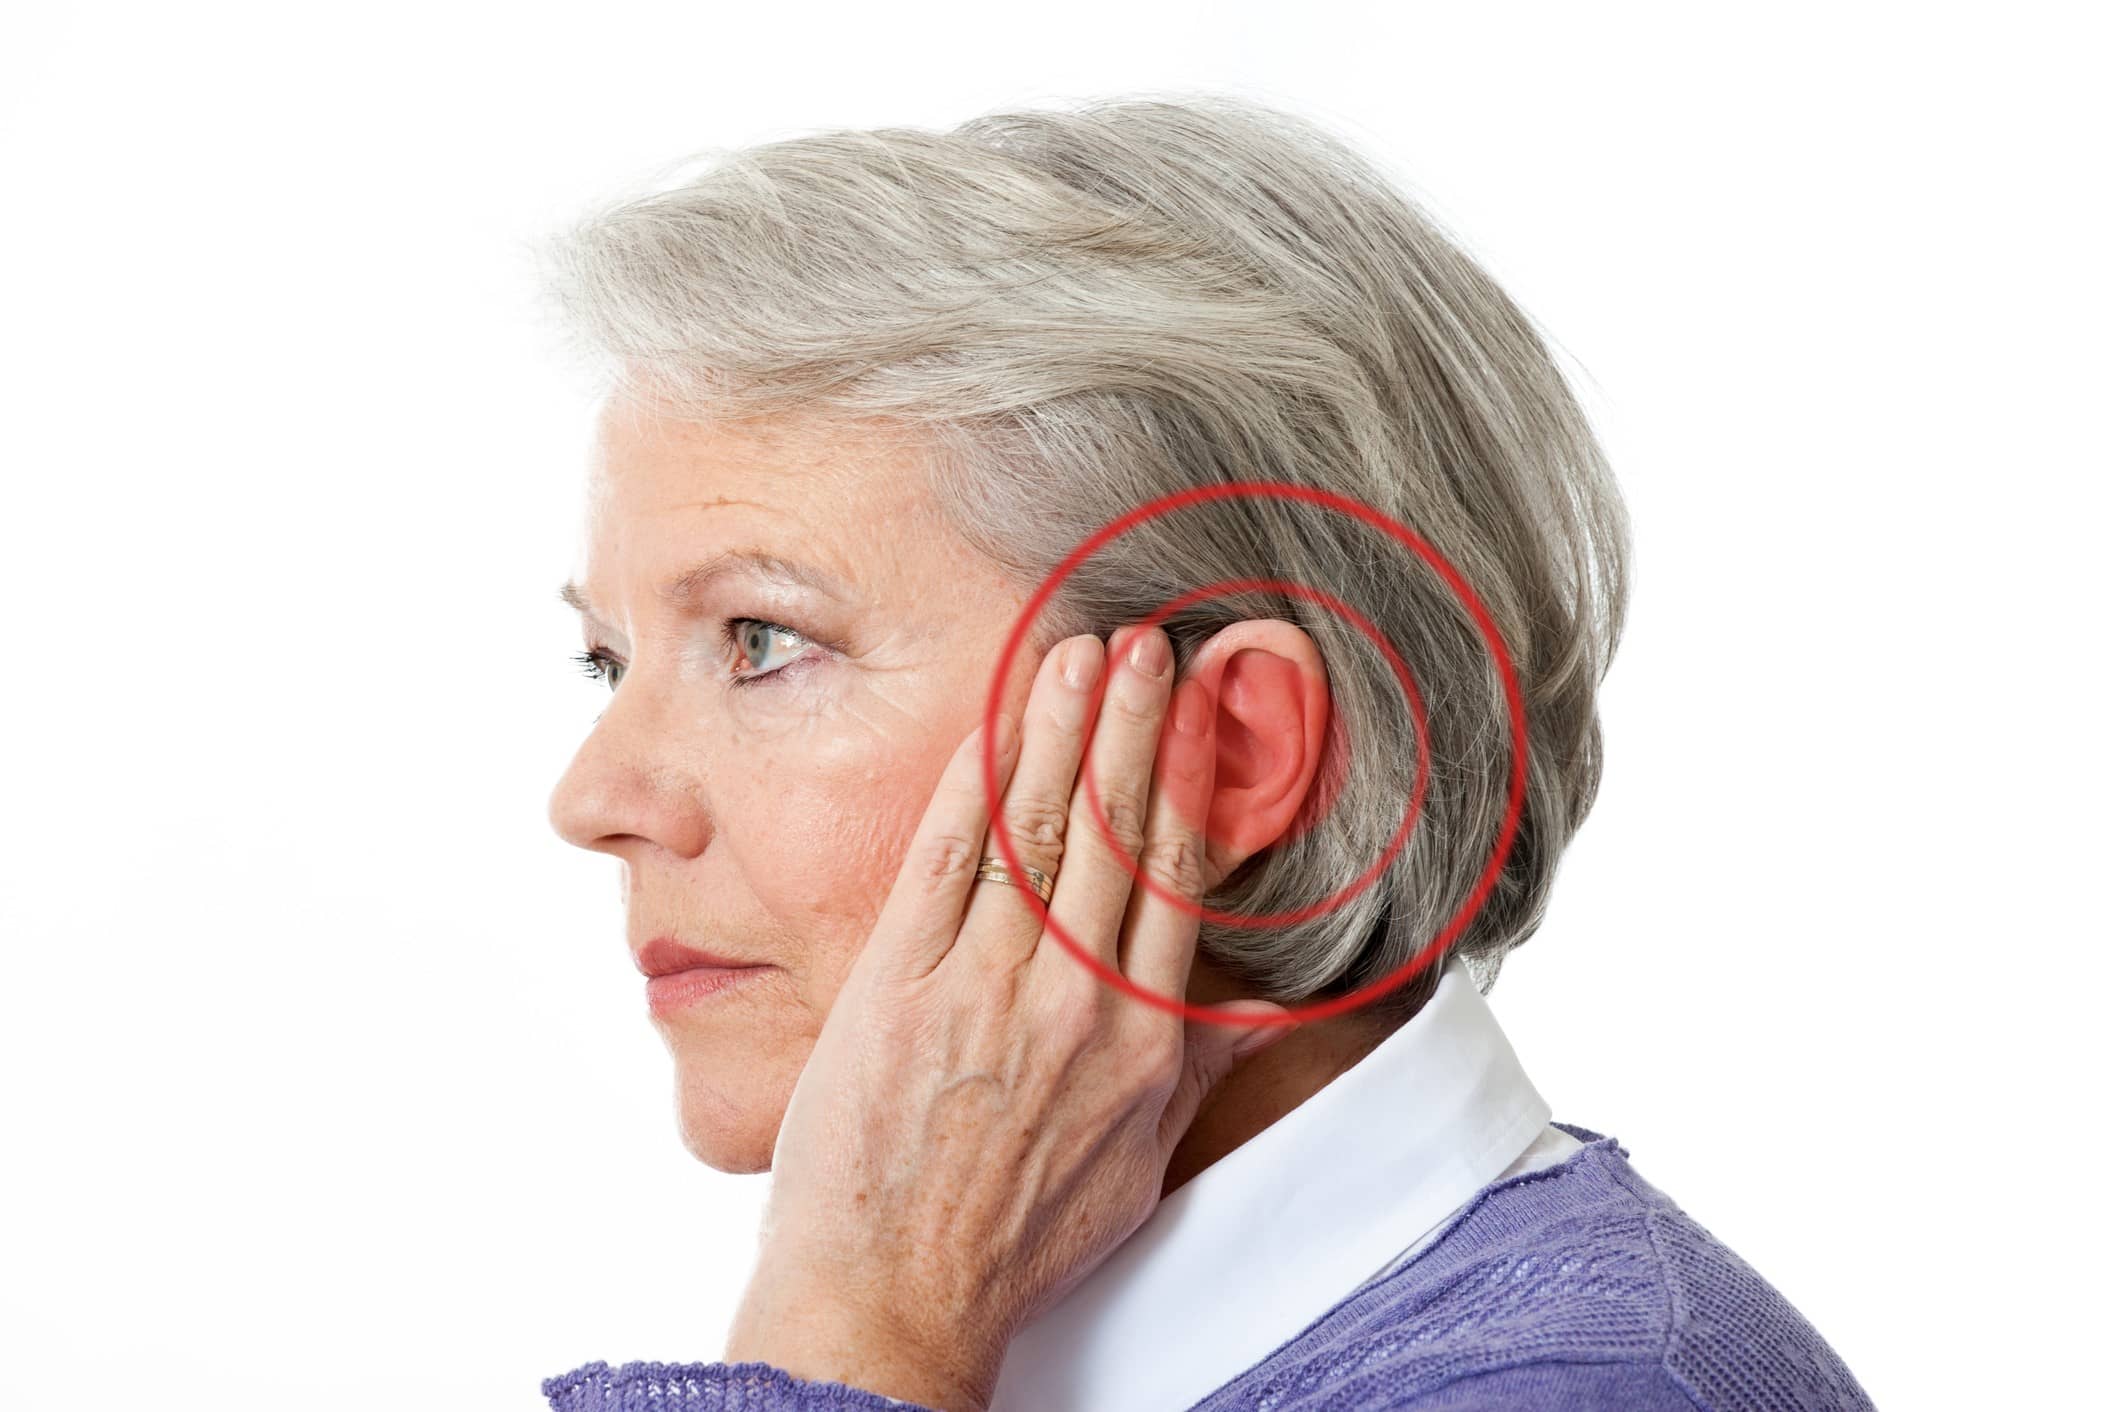 Tinnitus: Simple Home Techniques to Alleviate Symptoms